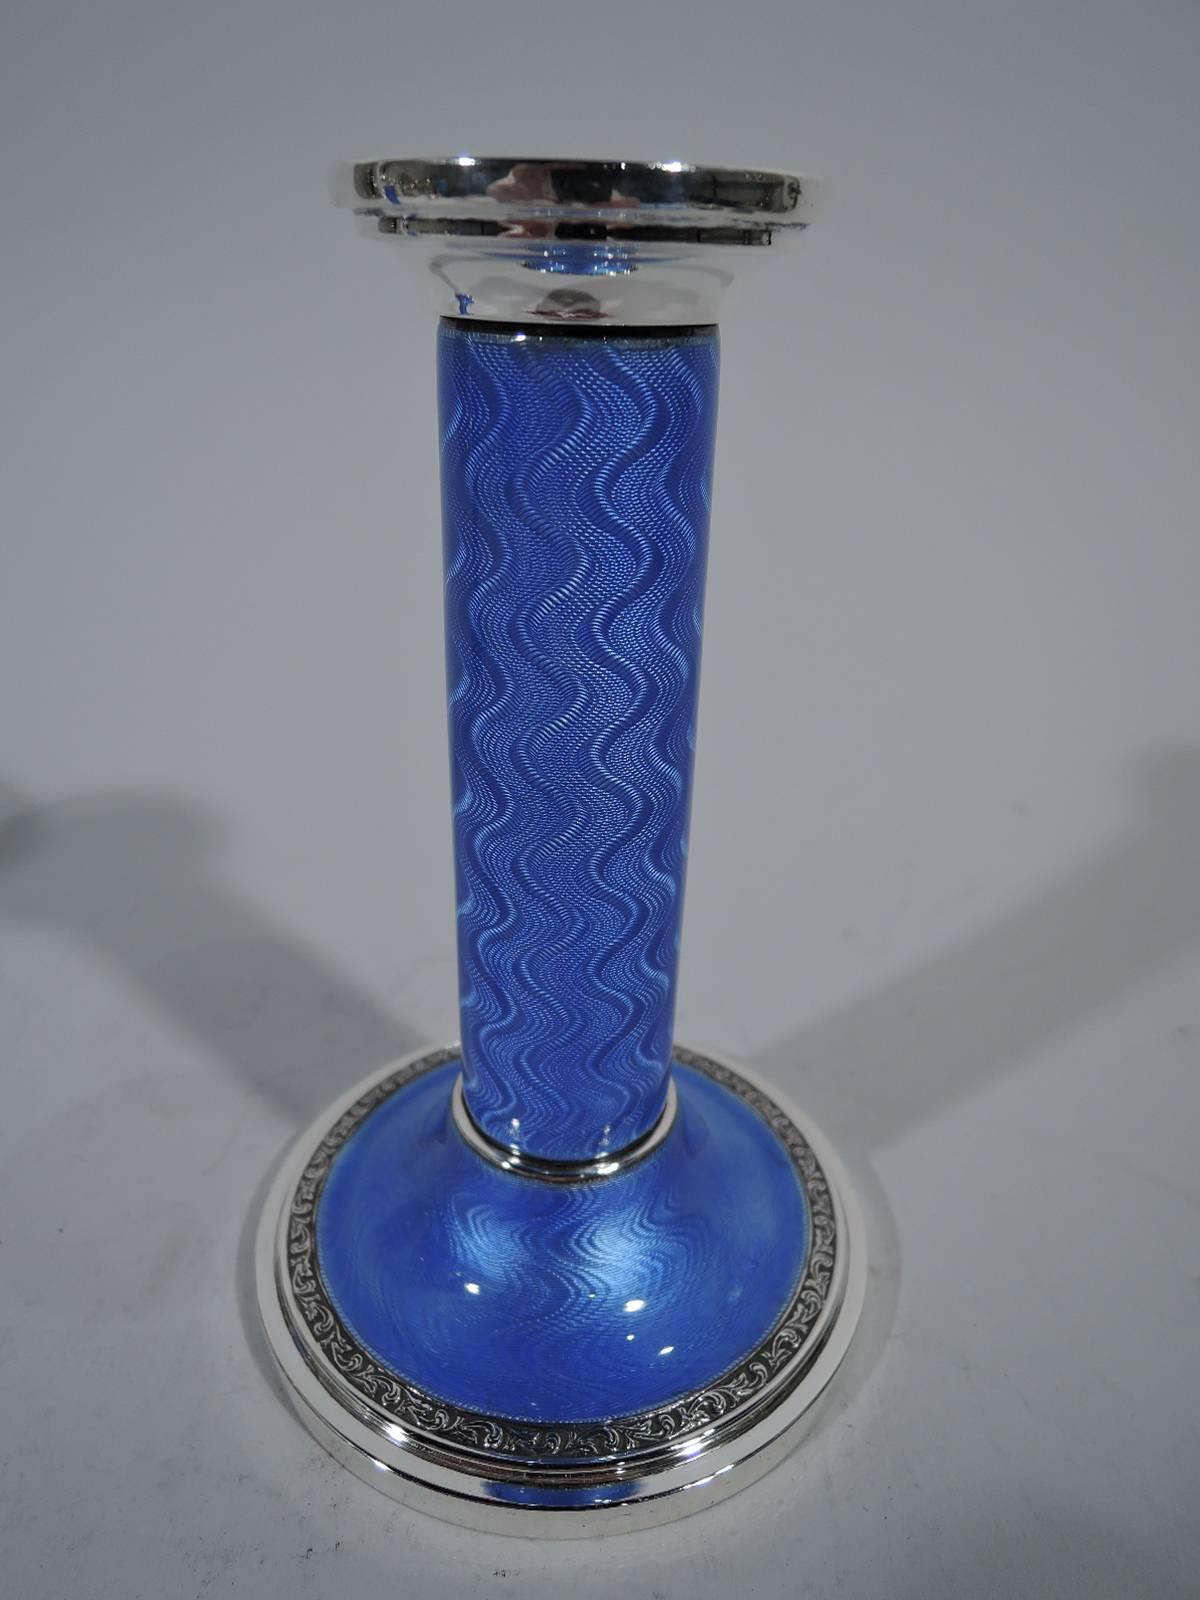 Pair of Art Deco sterling silver and enamel candlesticks. Made by Henry Matthews in Birmingham in 1930. Each: Column on domed foot. Blue guilloche enamel with wave pattern. Socket silver as is band at column base and foot rim with raised scrollwork.